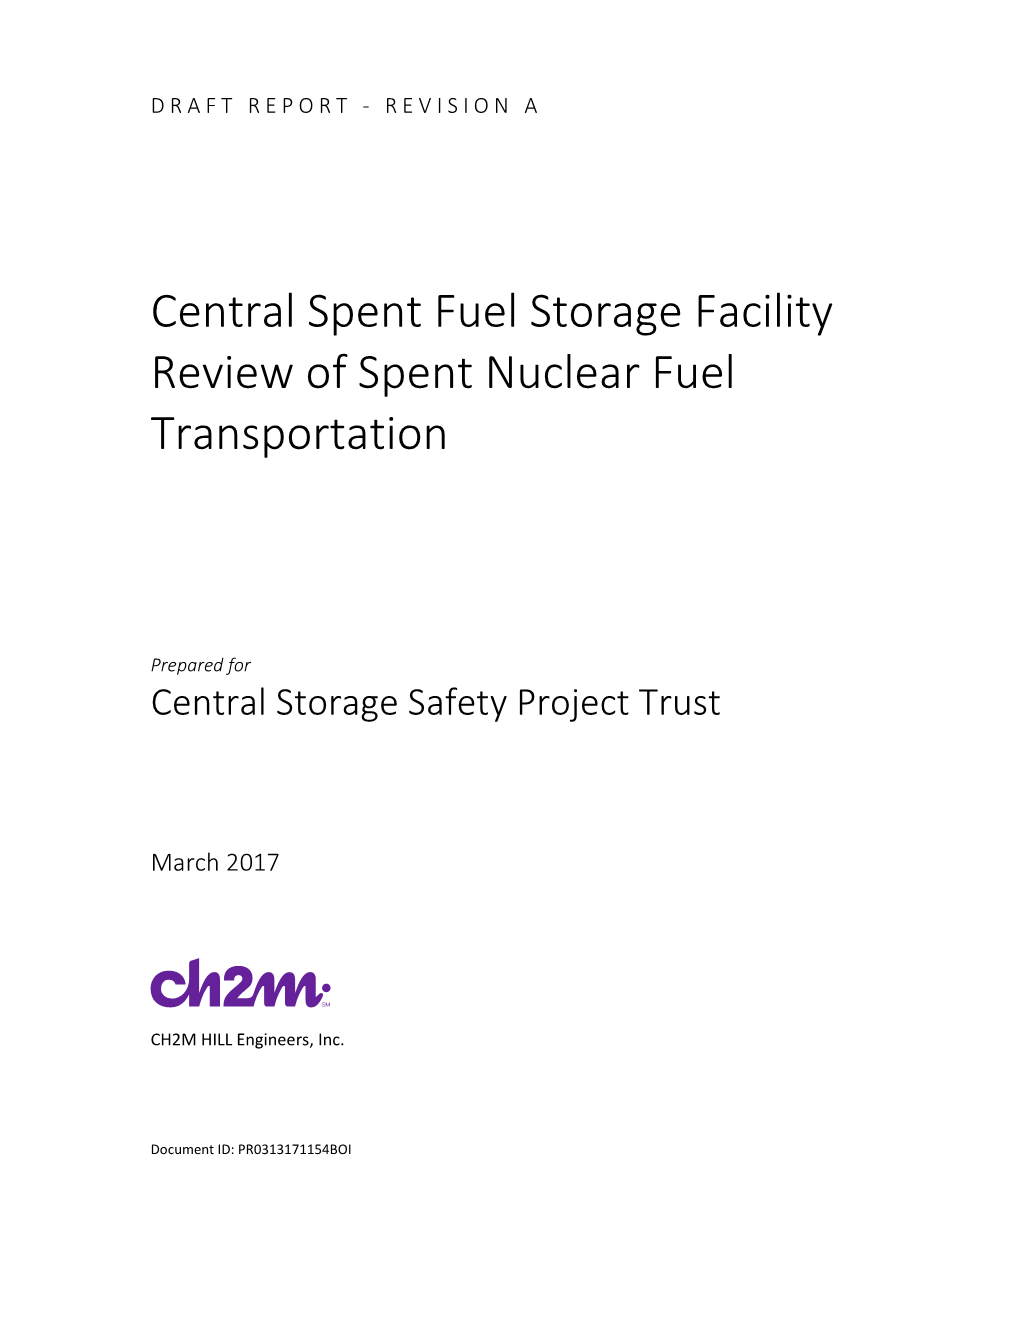 Central Spent Fuel Storage Facility Review of Spent Nuclear Fuel Transportation